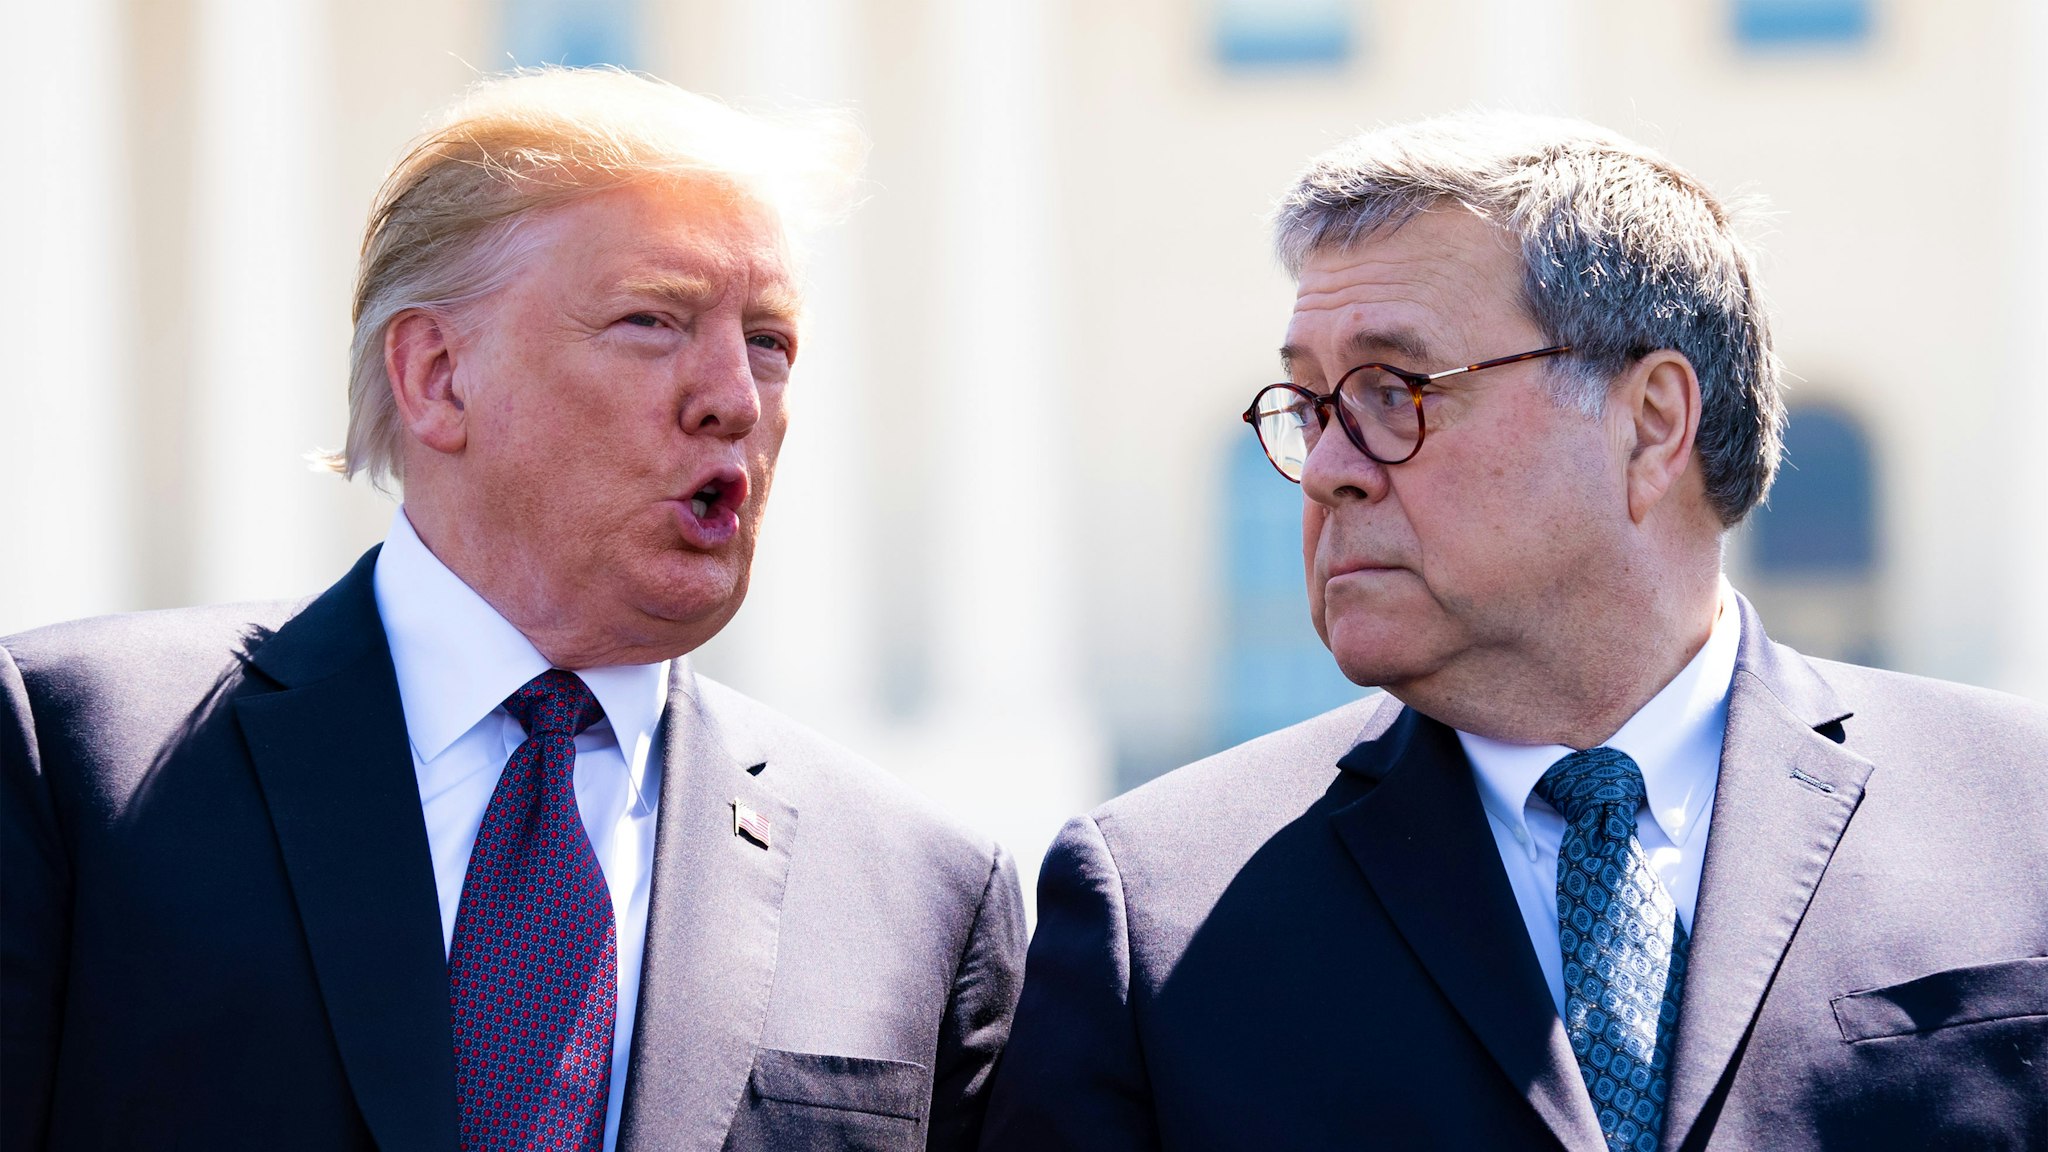 U.S. President Donald Trump, left, speaks to William Barr, U.S. attorney general, during the 38th annual National Peace Officers Memorial Day service at the U.S. Capitol in Washington, D.C., U.S., on Wednesday, May 15, 2019. Trump is poised to delay a decision by up to six months to impose auto tariffs to avoid blowing up negotiations with the EU and Japan and further antagonizing allies as he ramps up his trade war with China, according to people close to the discussions.